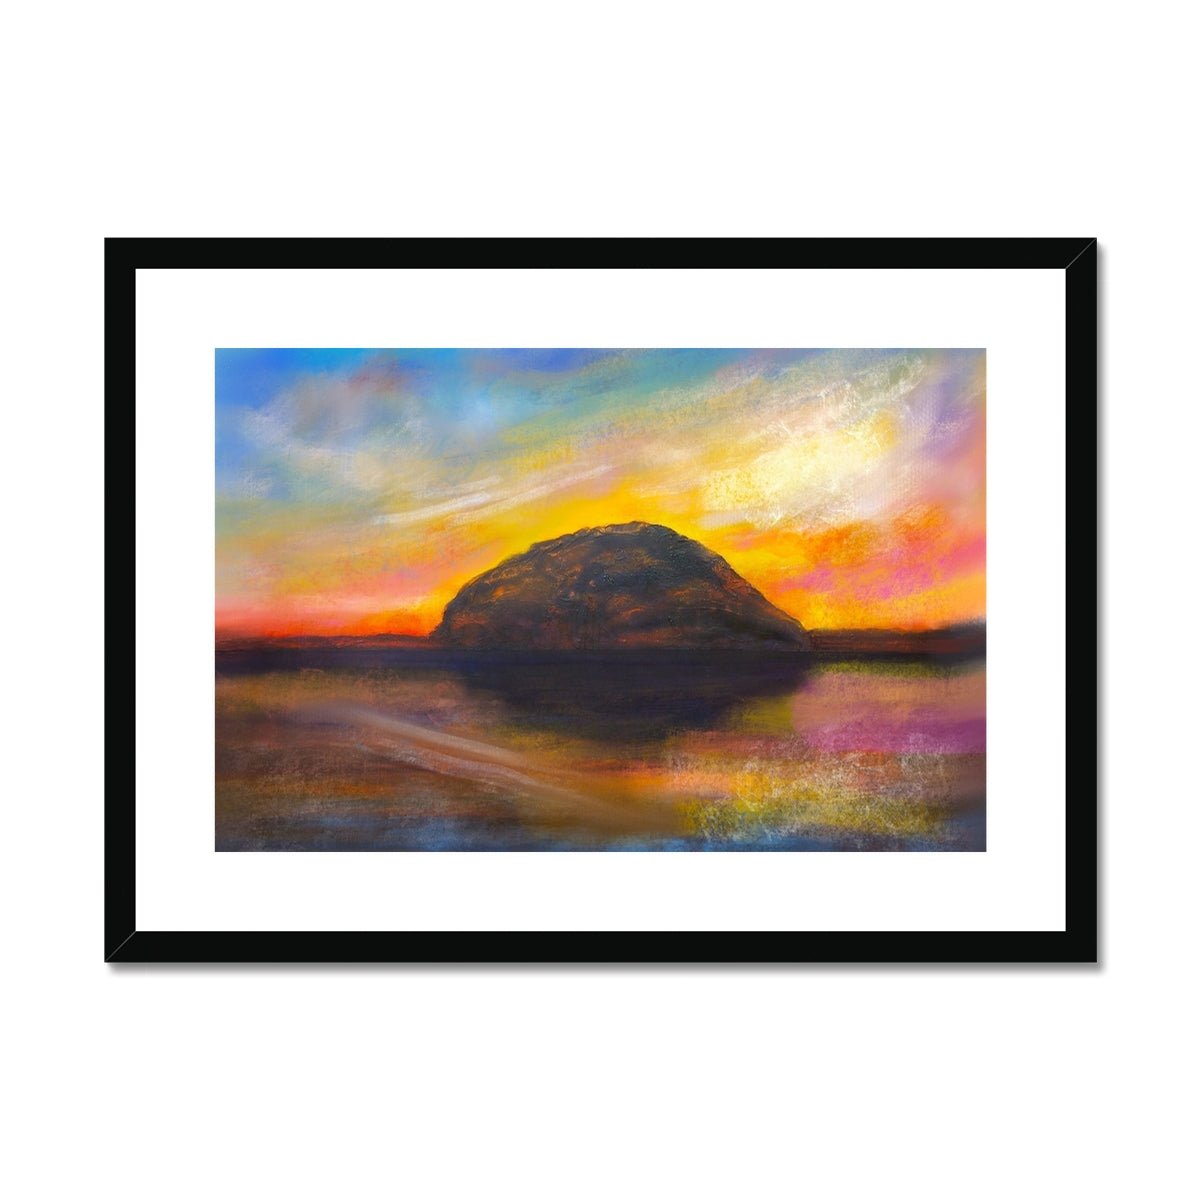 Ailsa Craig Dusk Painting | Framed & Mounted Prints From Scotland-Framed & Mounted Prints-Arran Art Gallery-A2 Landscape-Black Frame-Paintings, Prints, Homeware, Art Gifts From Scotland By Scottish Artist Kevin Hunter